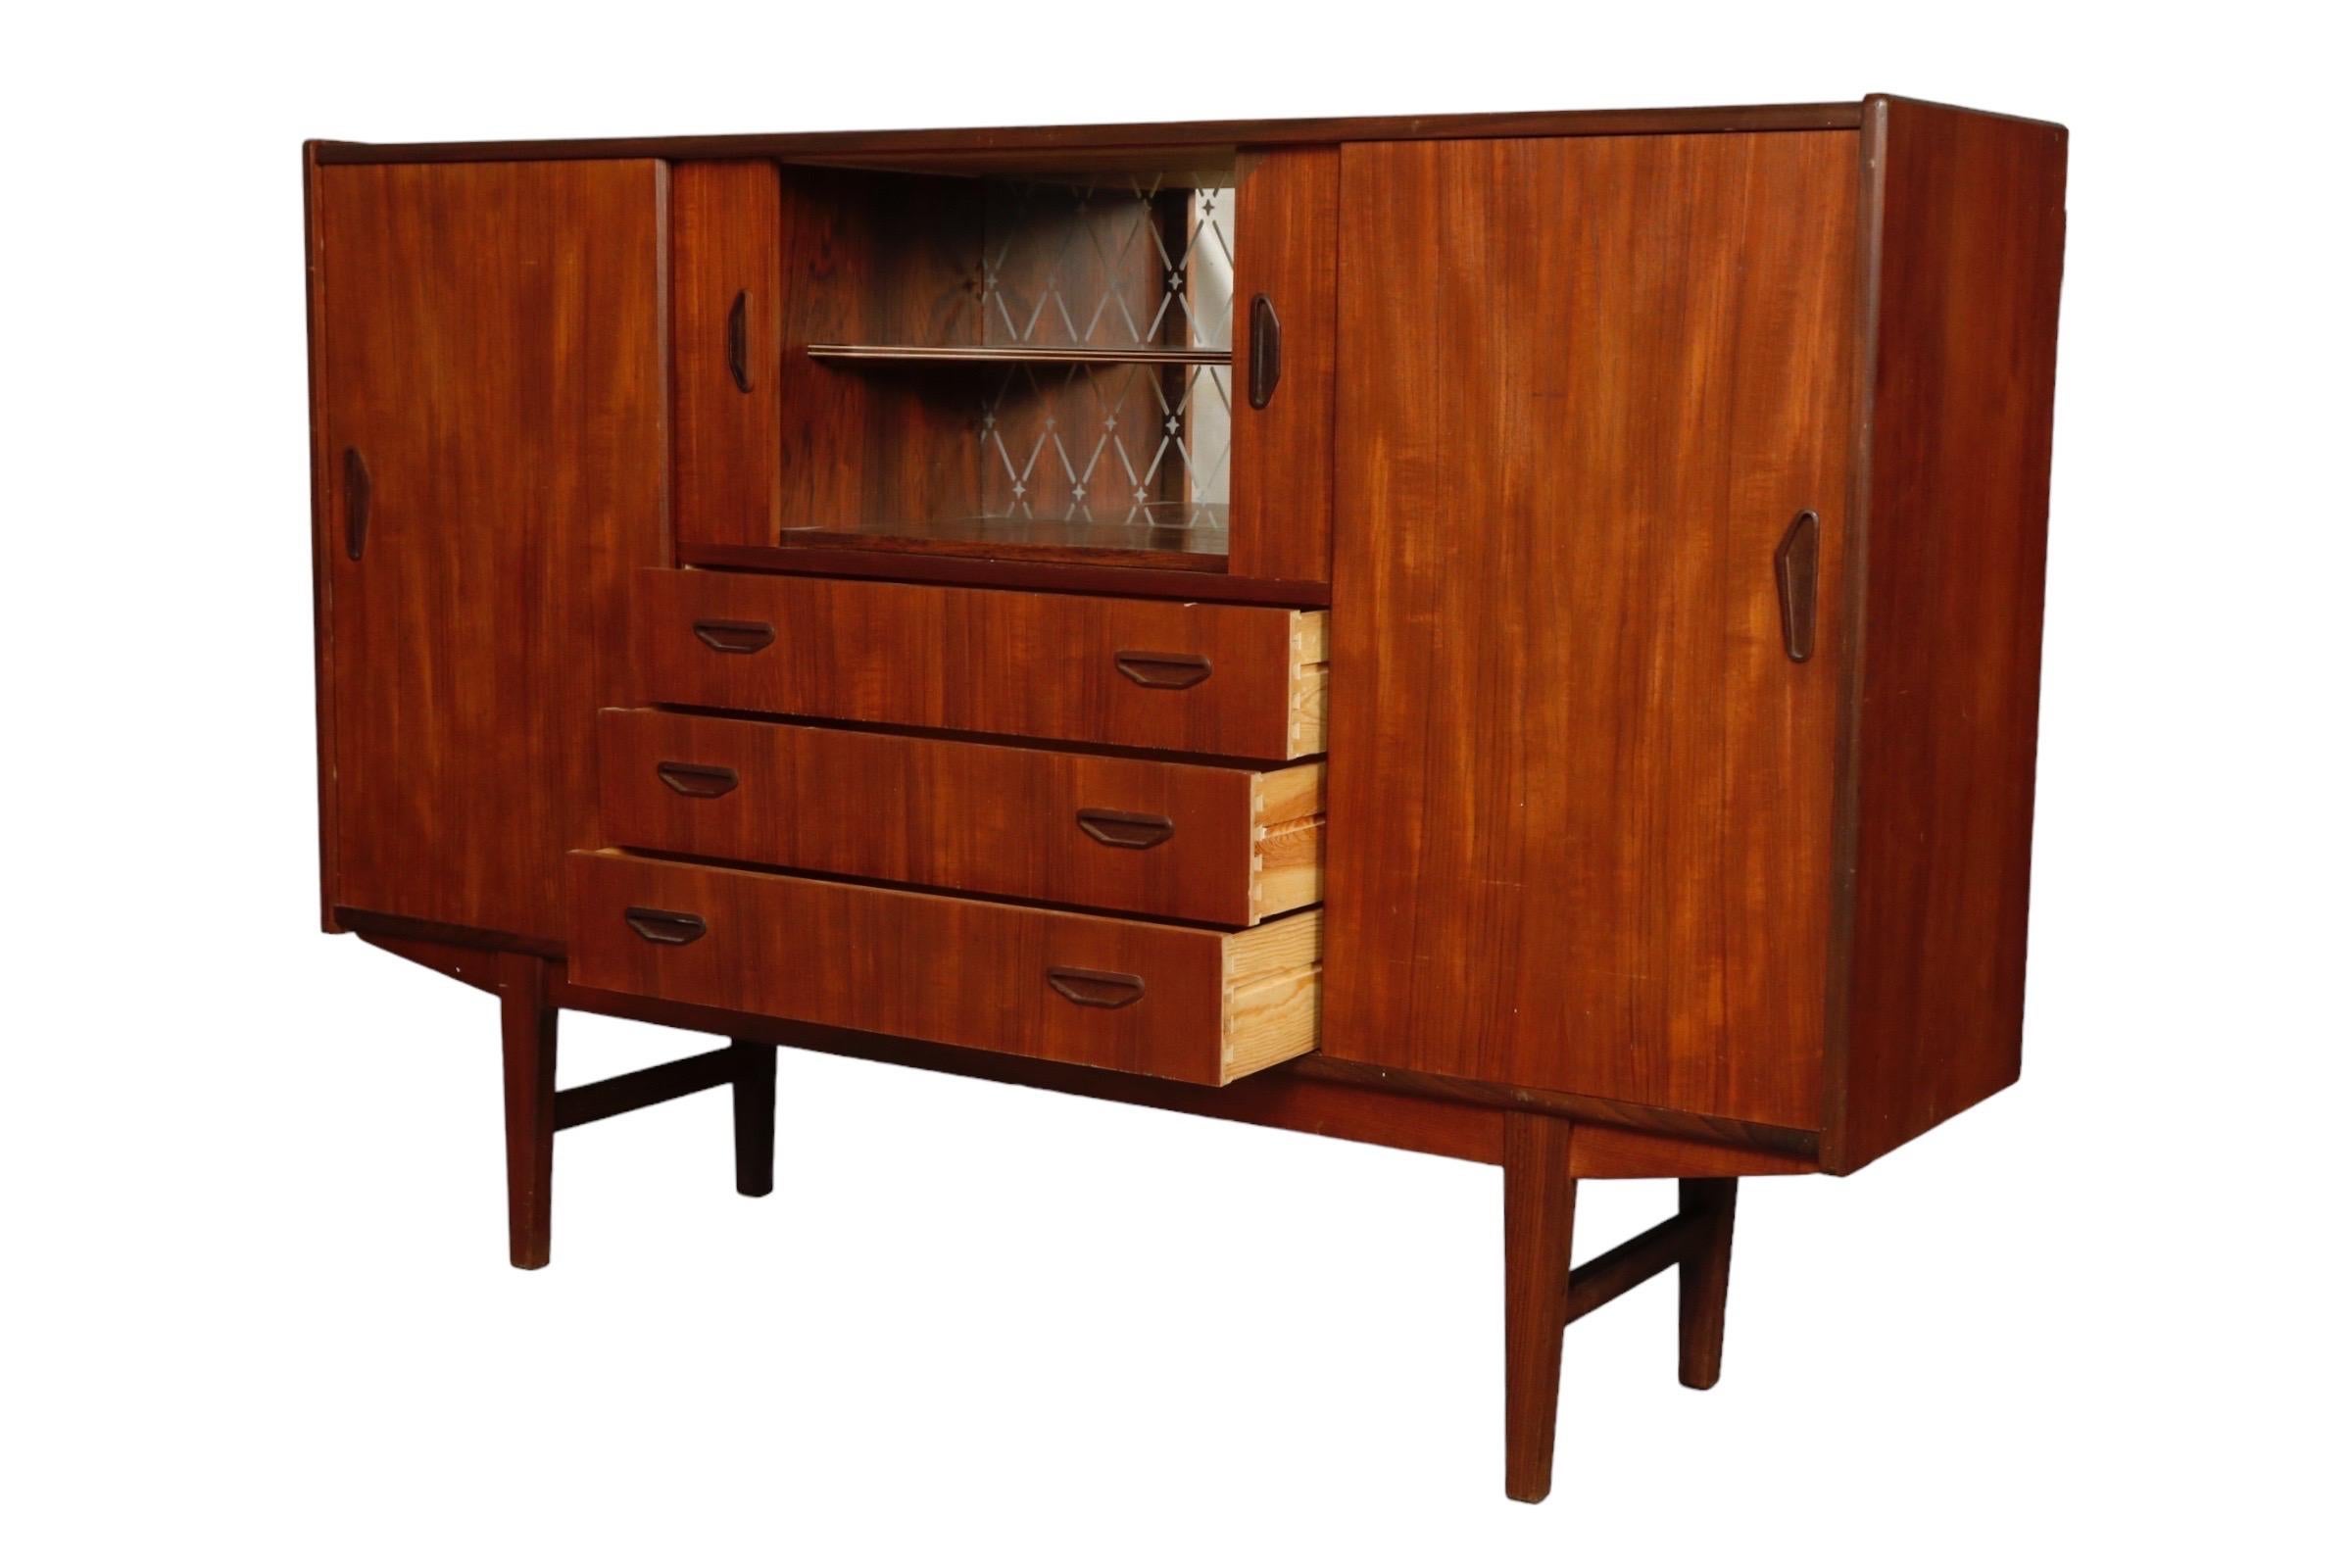 A Danish mid century tall buffet. Small sliding doors above three dovetailed drawers in the center open to reveal a mirrored bar area. On either side larger sliding doors reveal six shelves and ample storage. Finished with round tapered legs.